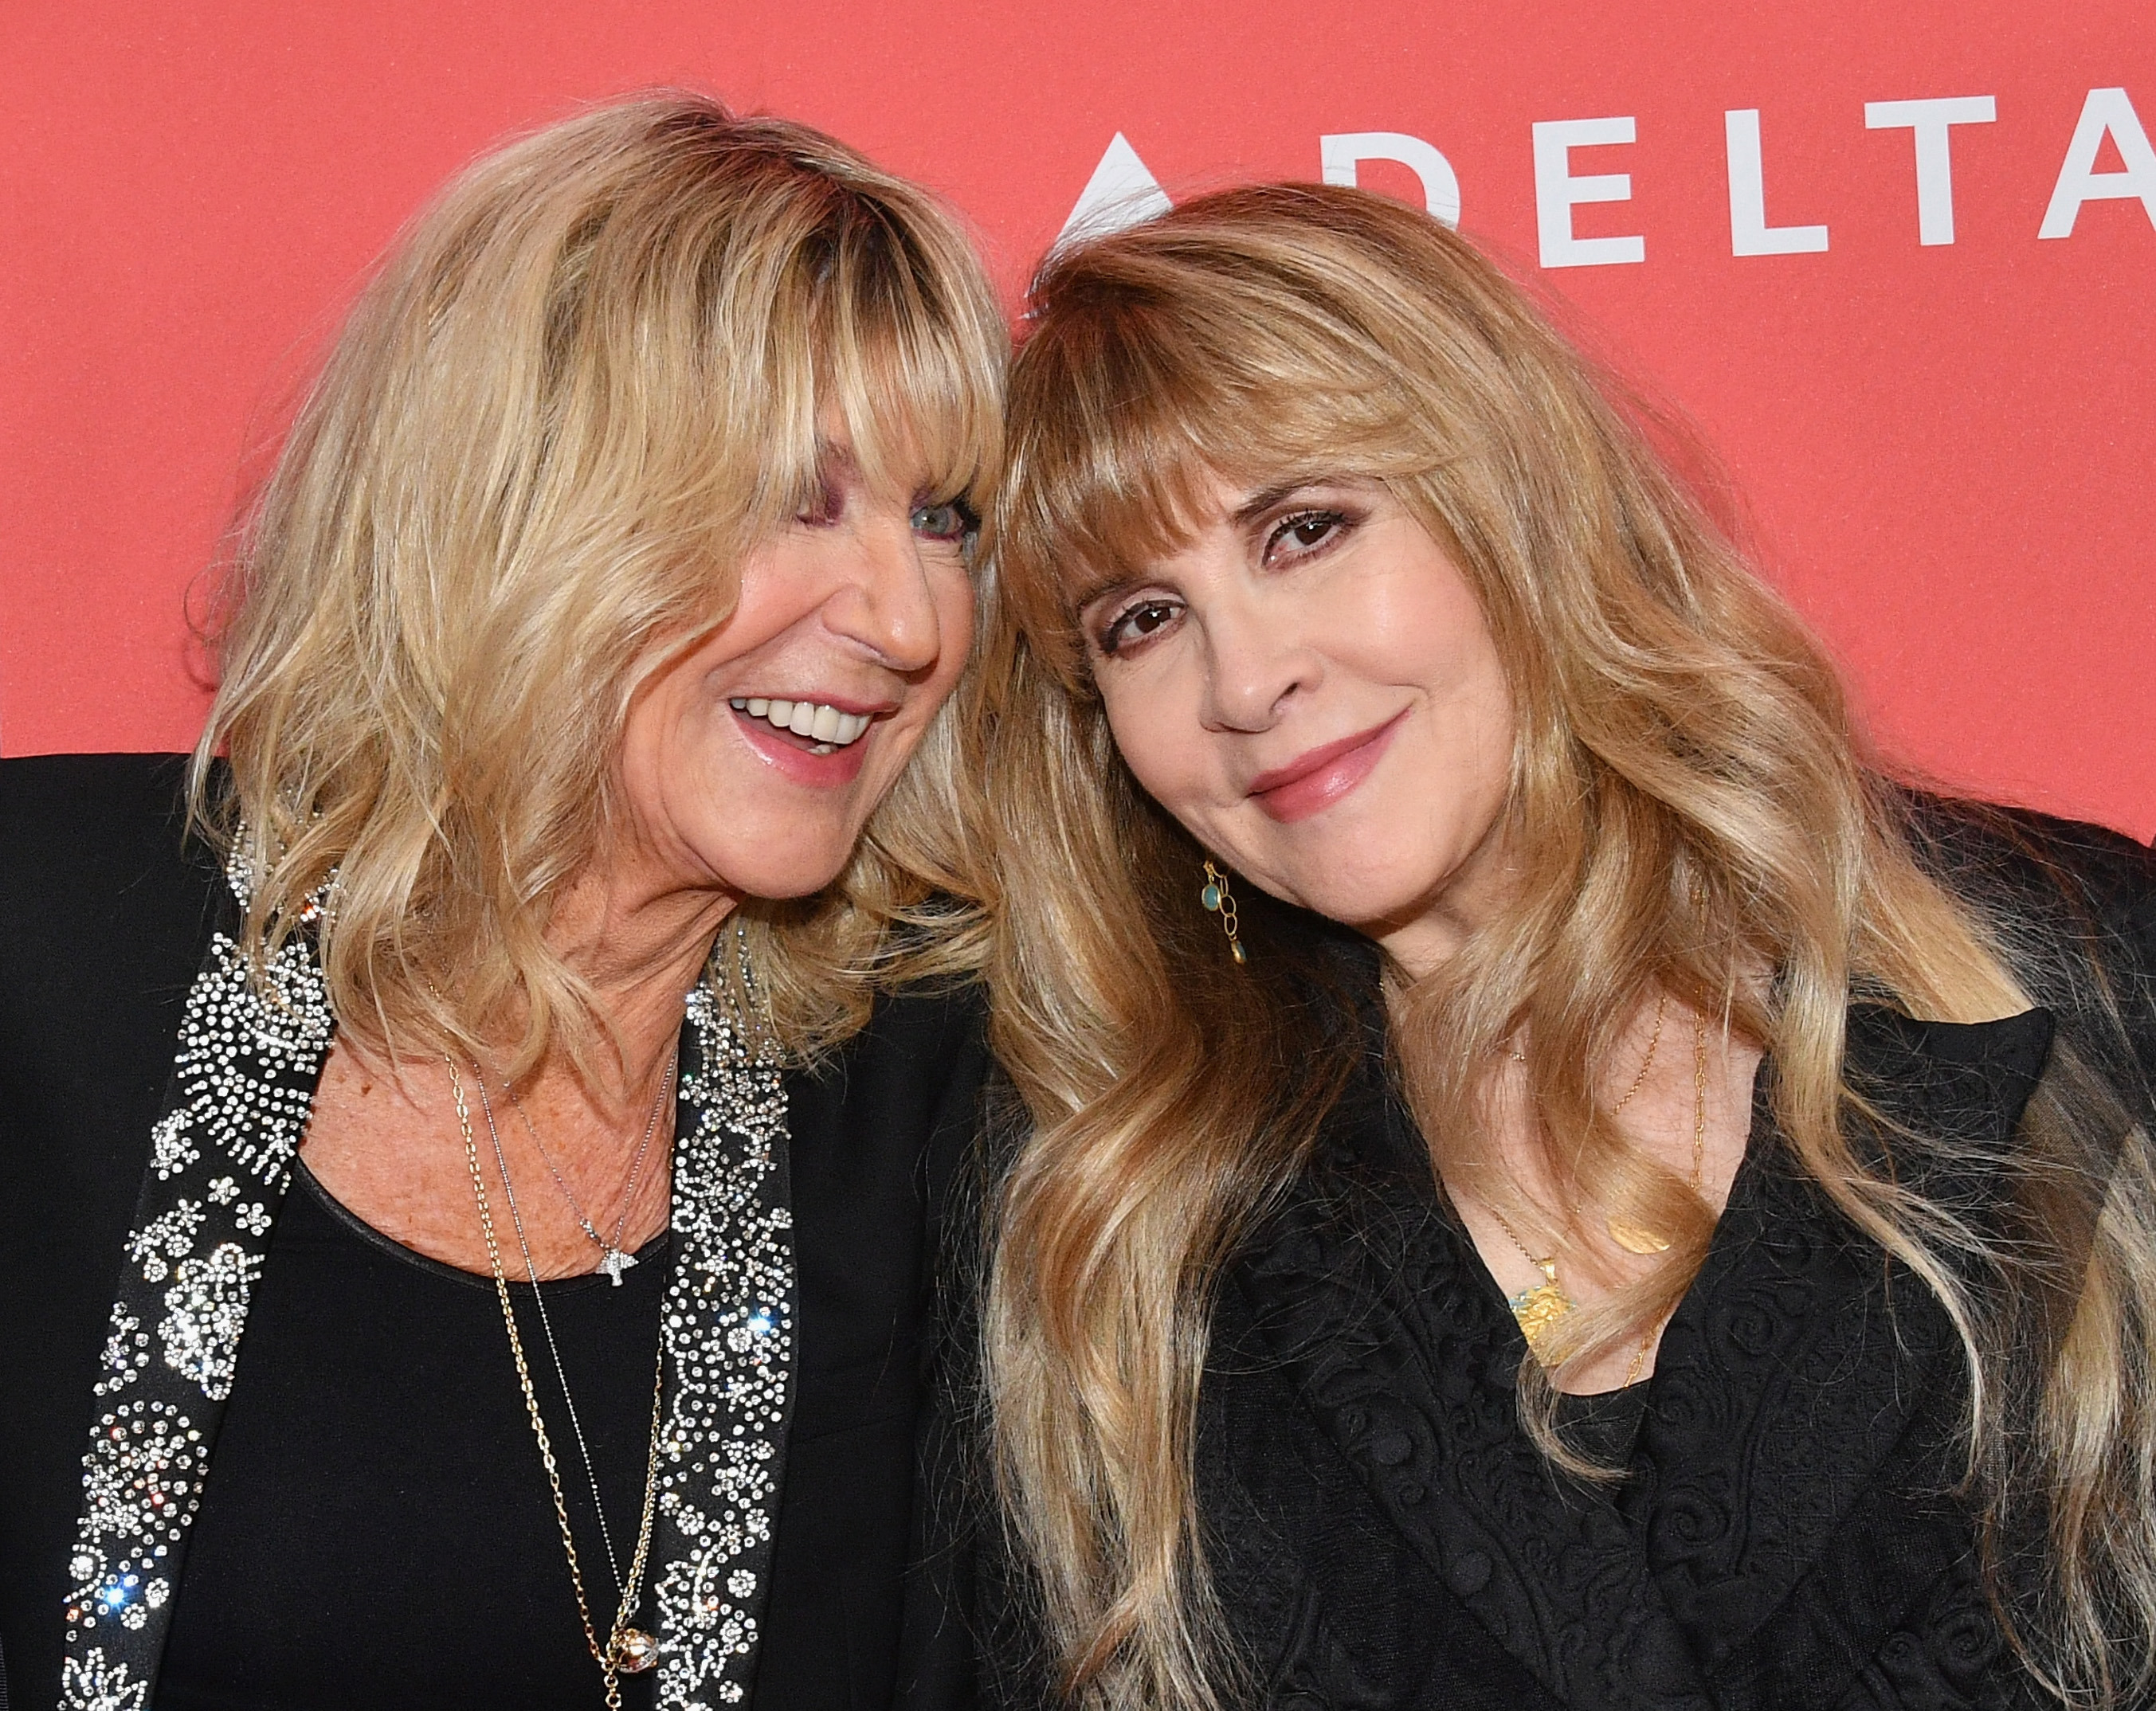 Christine McVie and Stevie Nicks attend MusiCares Person of the Year honoring Fleetwood Mac at Radio City Music Hall on January 26, 2018 in New York City.